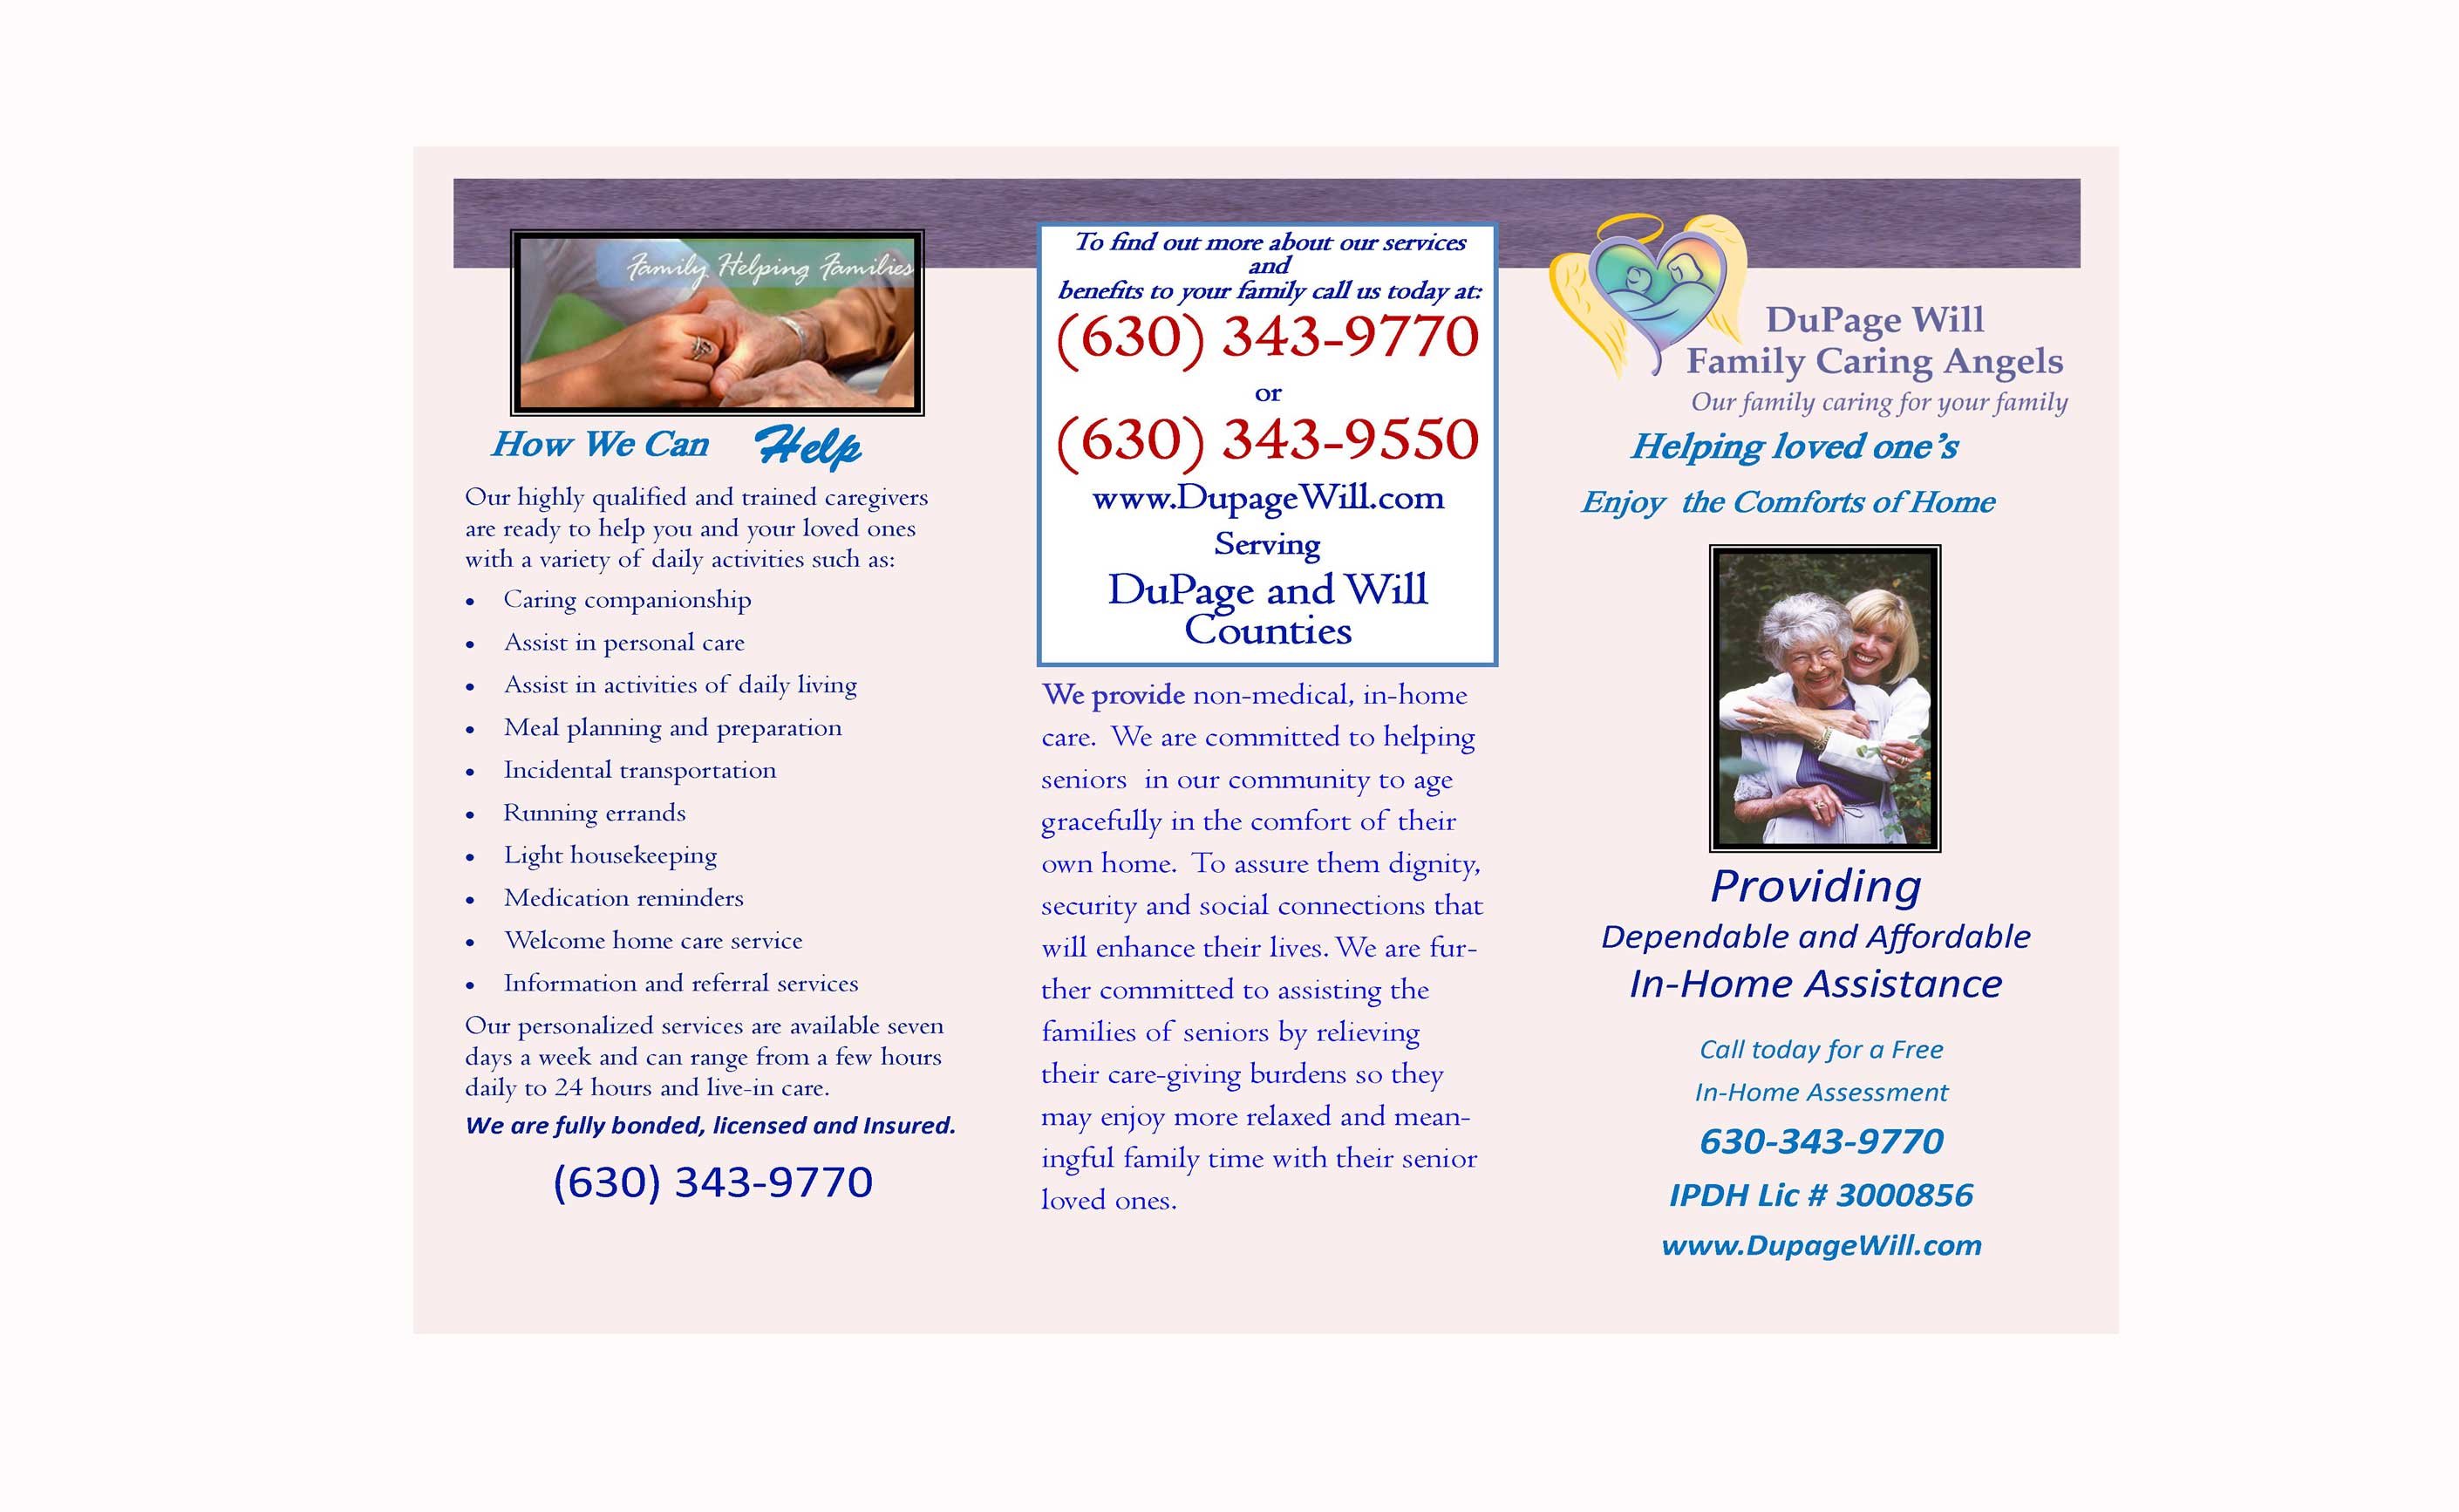 Dupage Will Family Caring Angels image